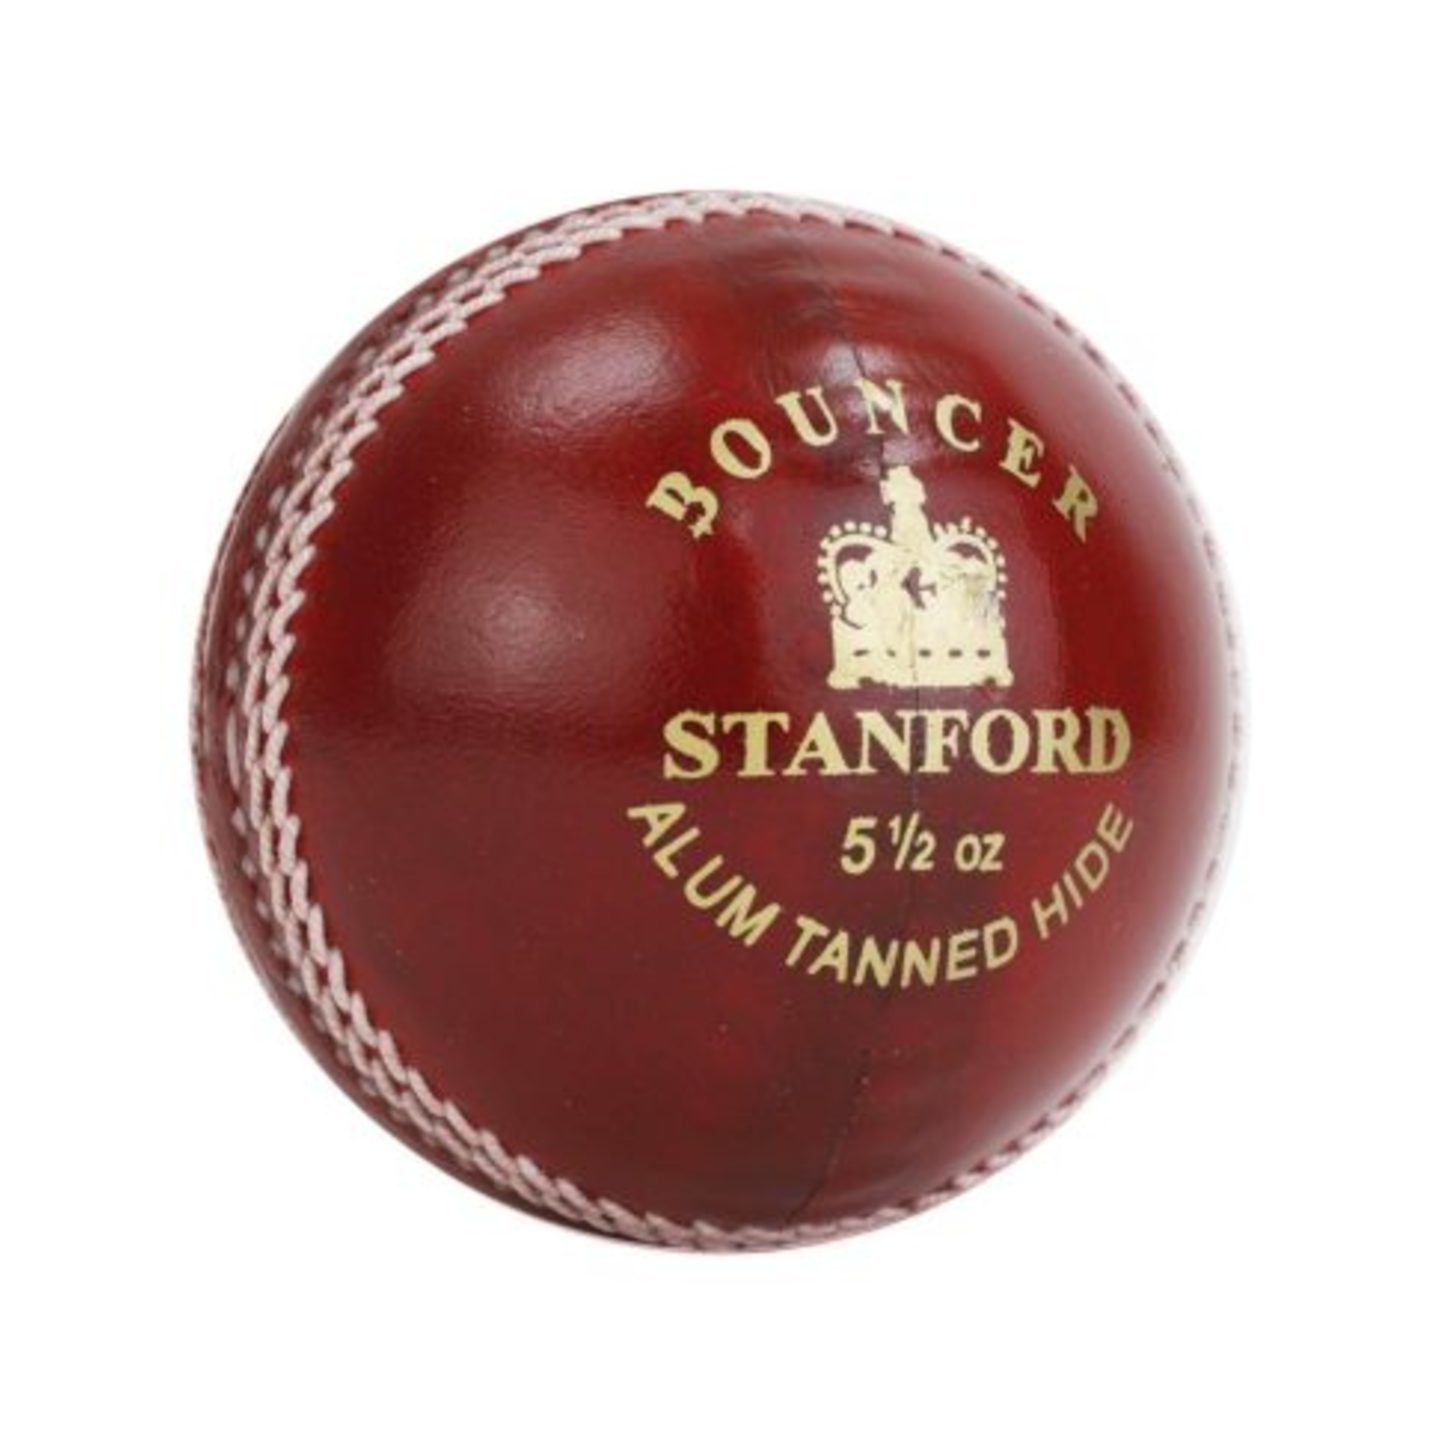 SF BOUNCER 4 PC. LEATHER CRICKET BALL